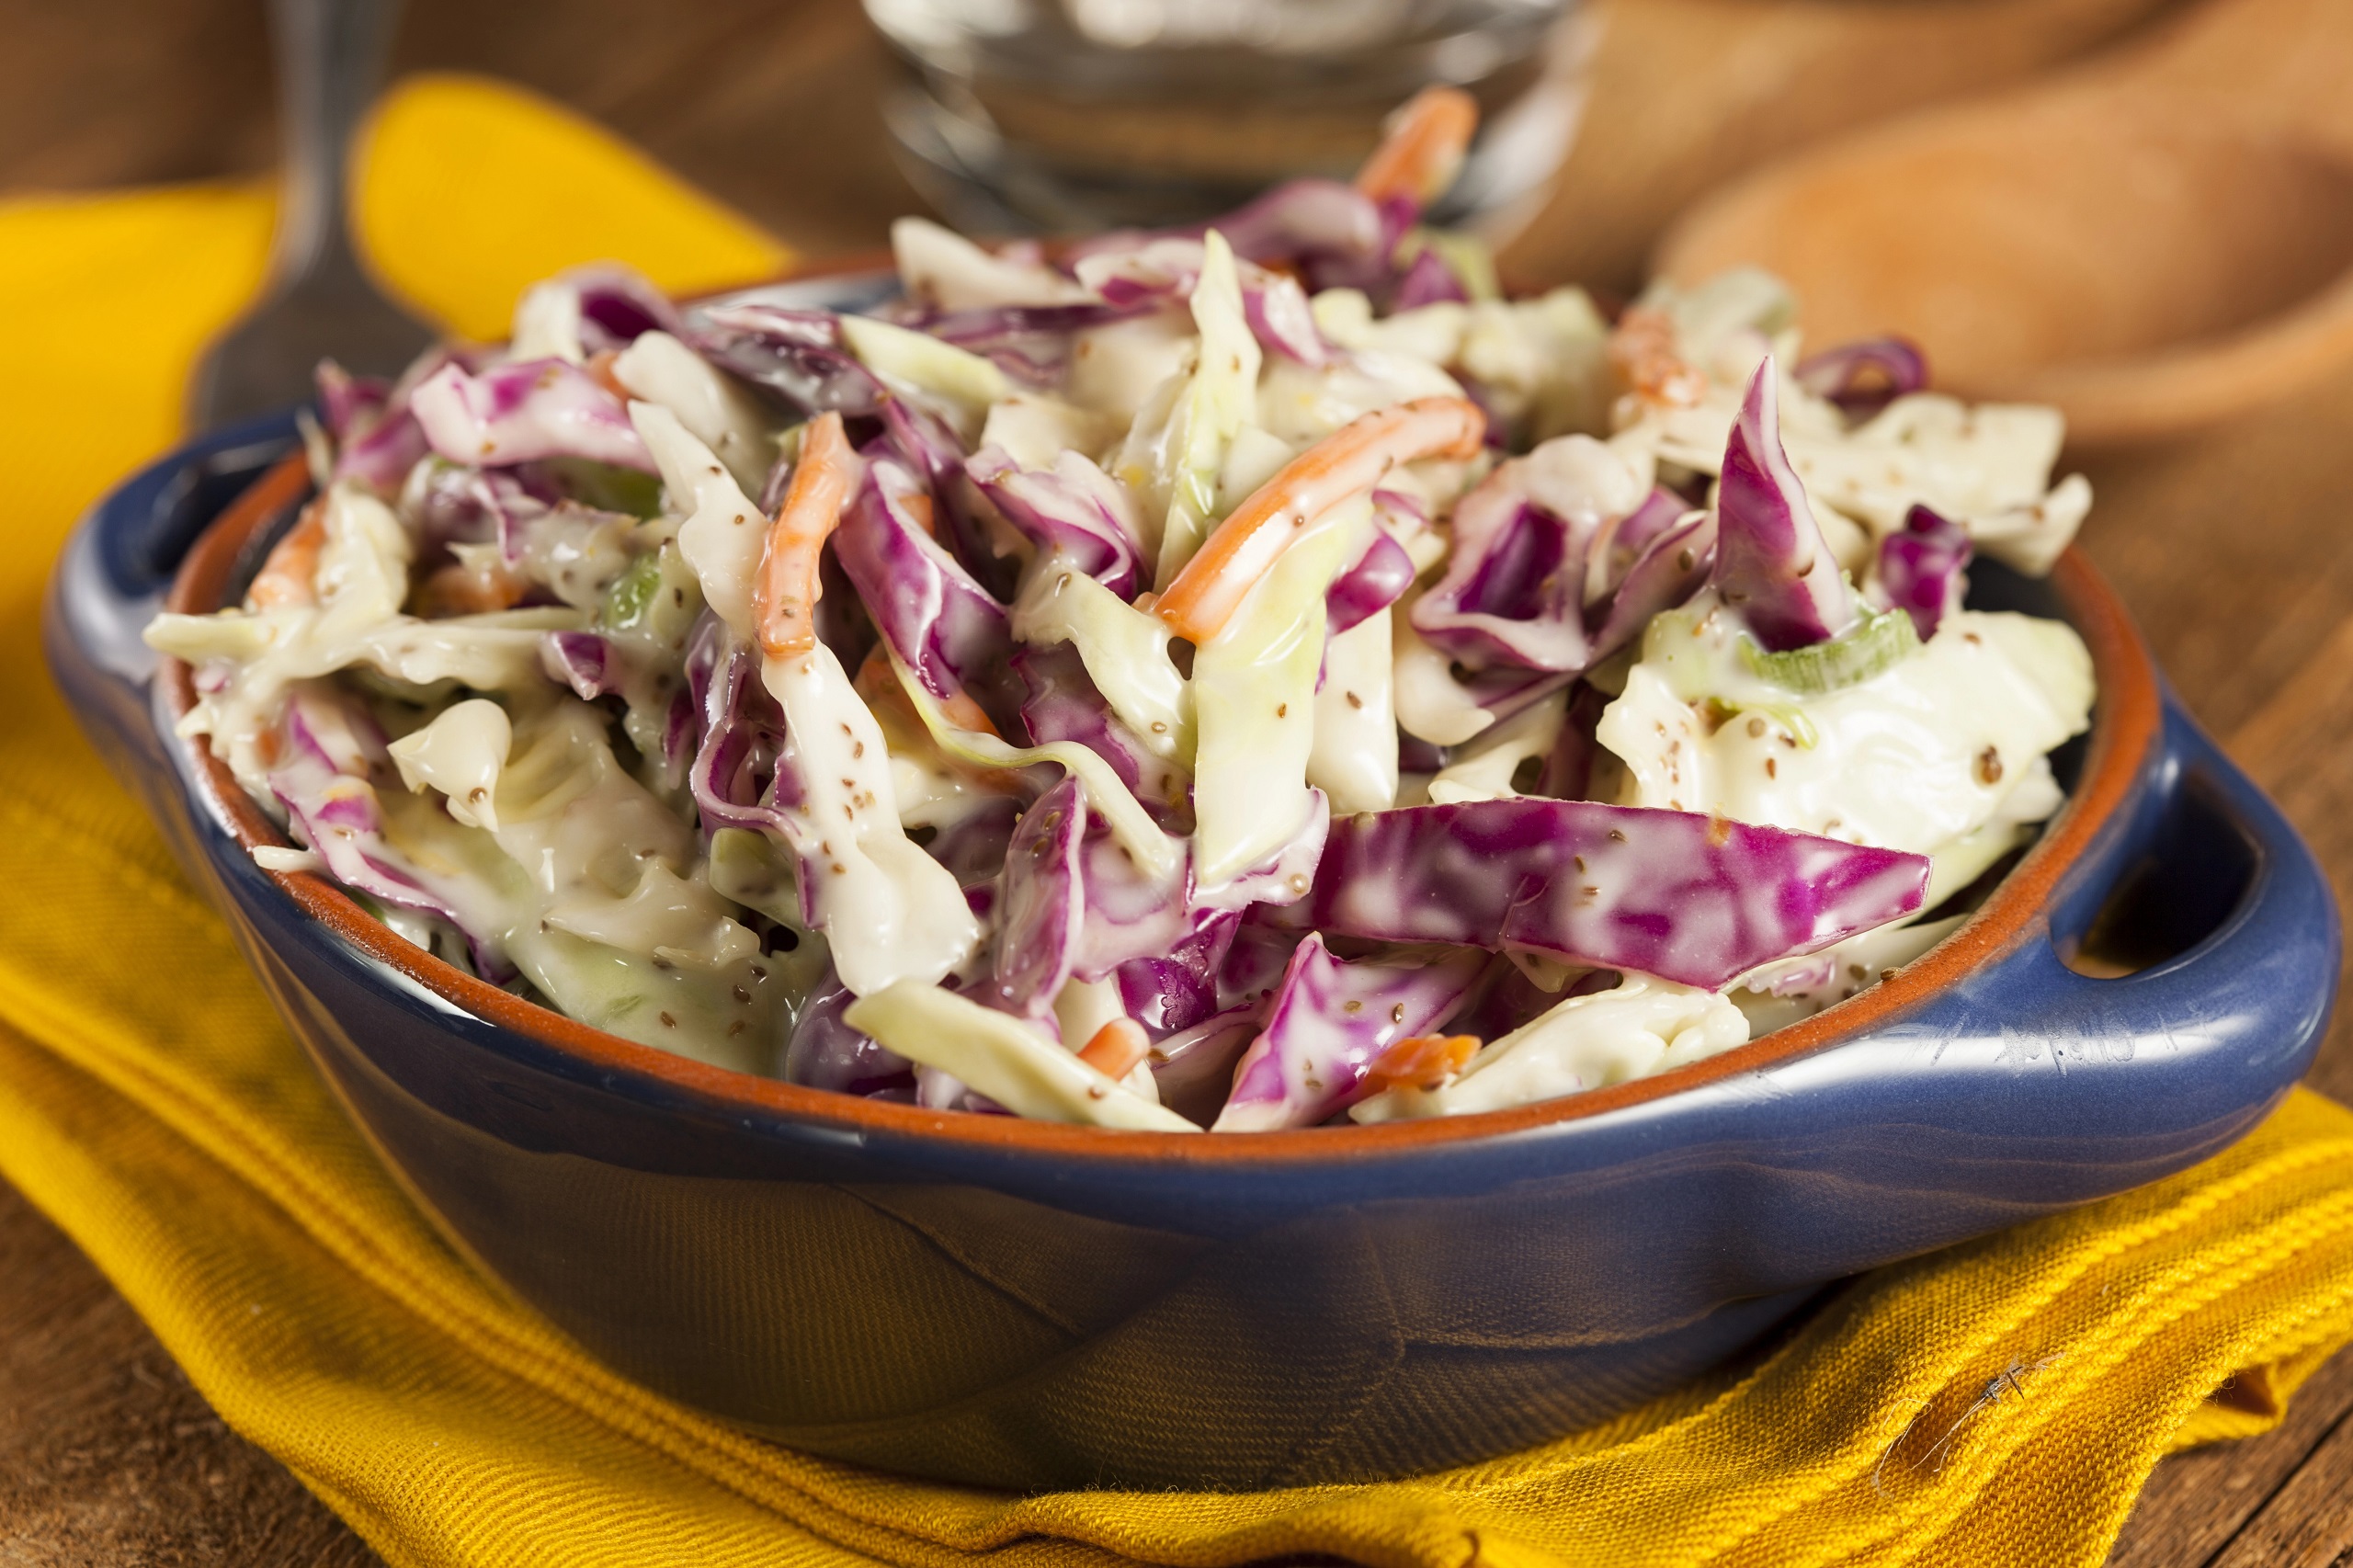 Coleslaw with red cabbage, carrots, and light mayo in a black salad bowl placed on a thick yellow cloth.